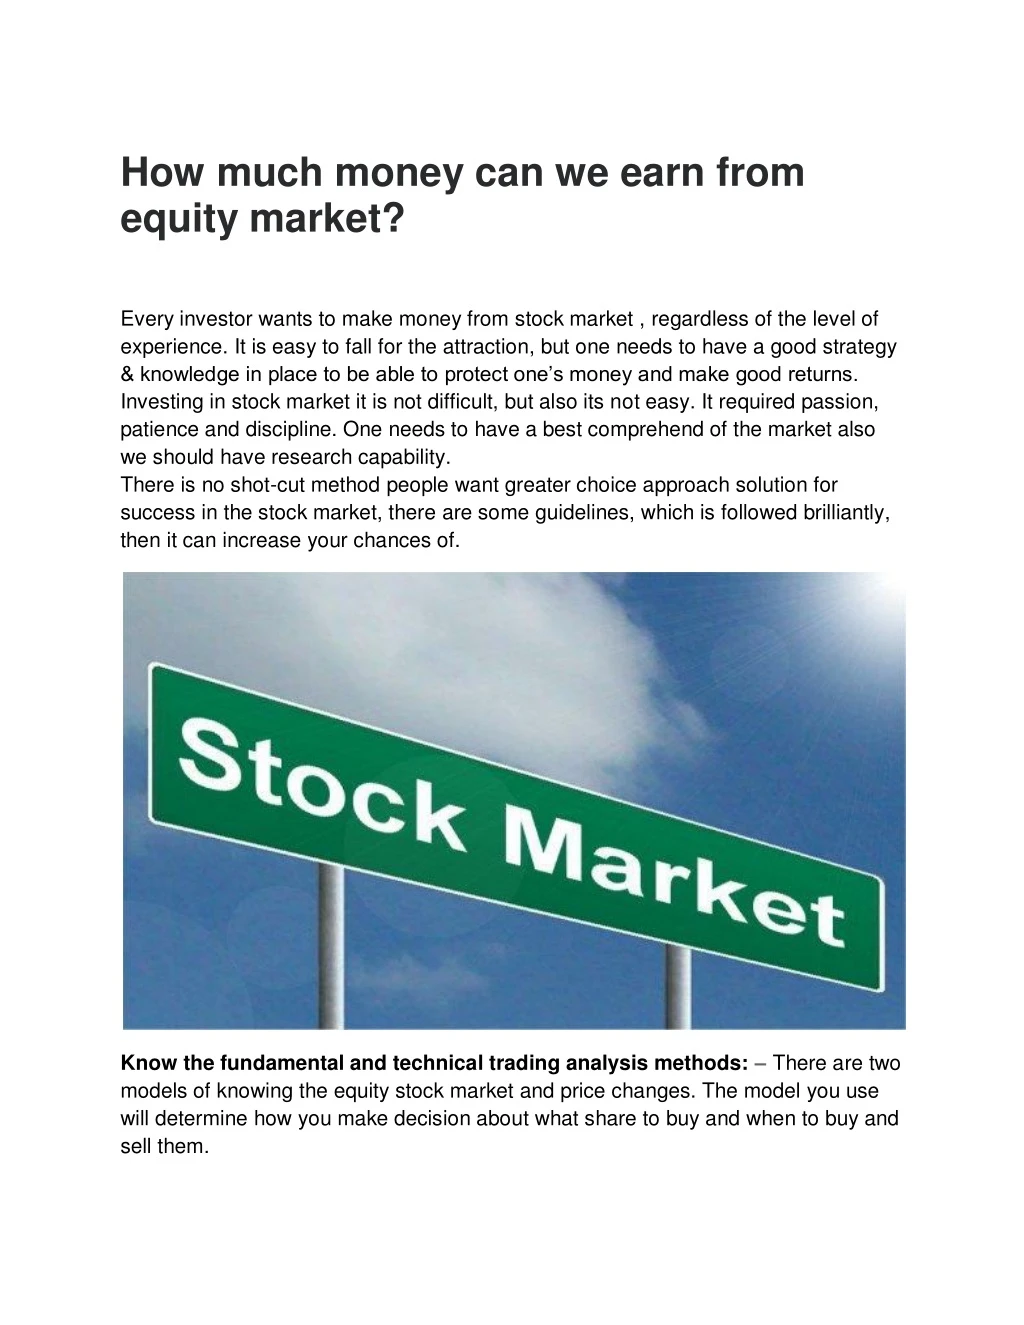 how much money can we earn from equity market